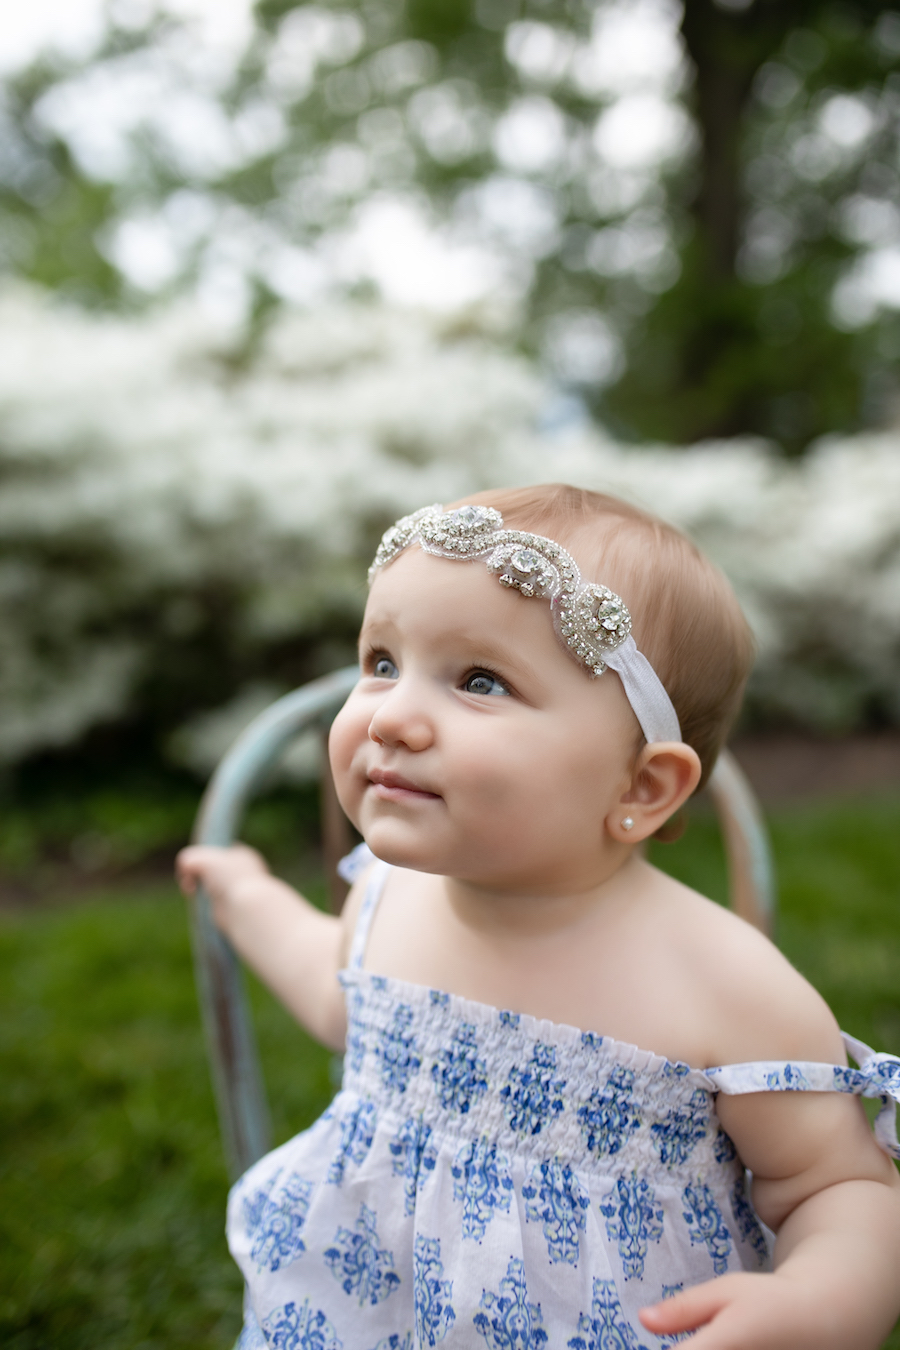 Baby sitting in chair with jeweled headband